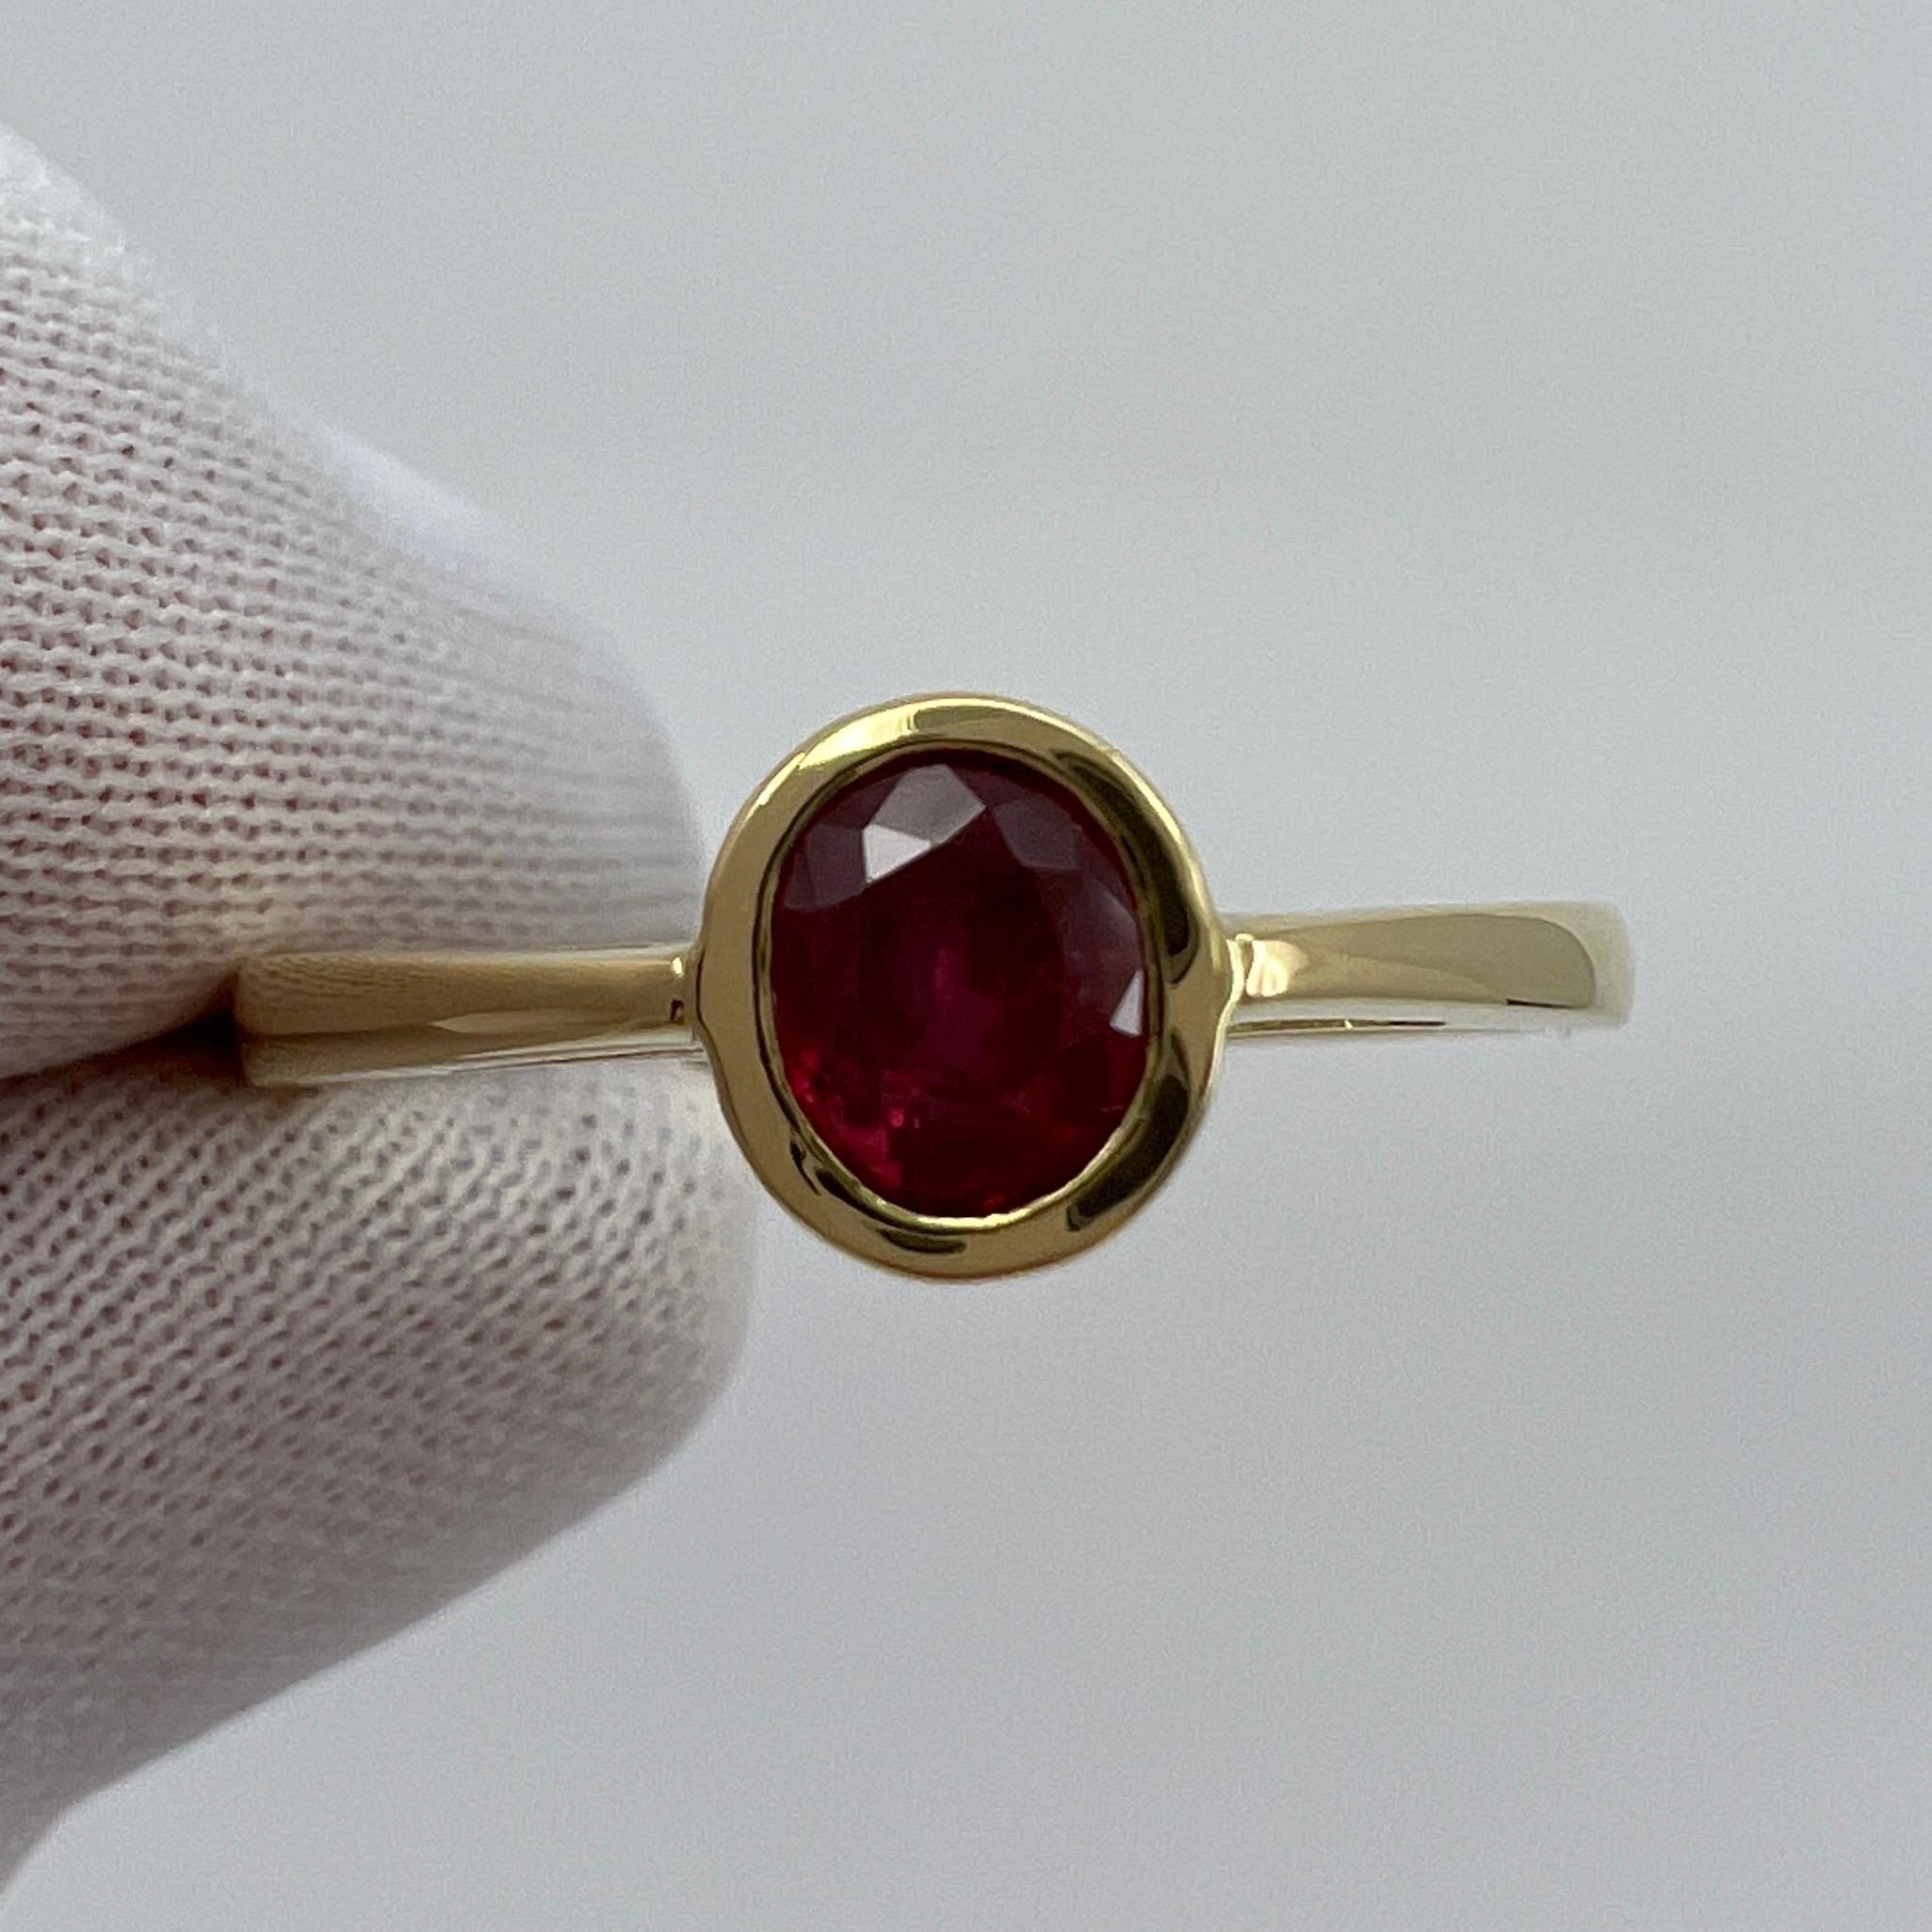 Fine Vivid Red Ruby 18 Karat Yellow Gold Solitaire Ring.

Stunning 0.75 carat ruby with a fine vivid red colour and excellent oval cut. Also has very good clarity with only some small natural inclusions visible when looking closely.

The ruby is set